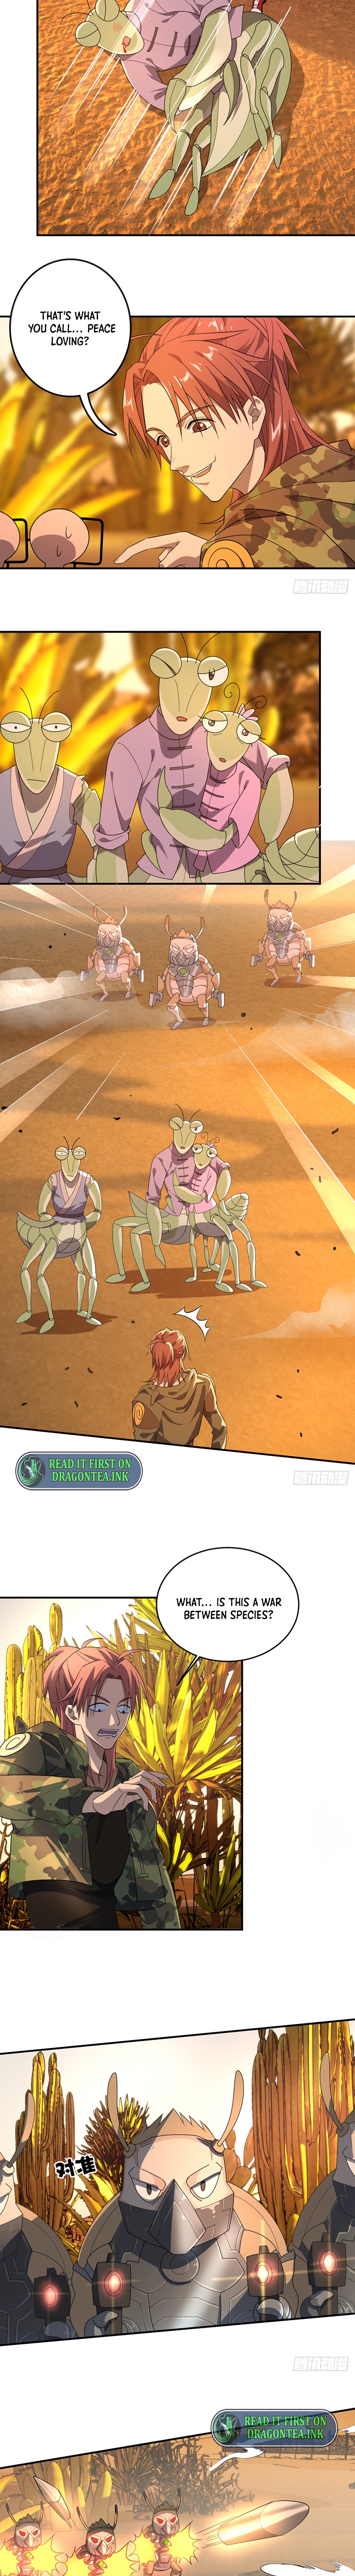 The Strongest Snail Has A Mansion In The World Of Snails chapter 5 - page 4